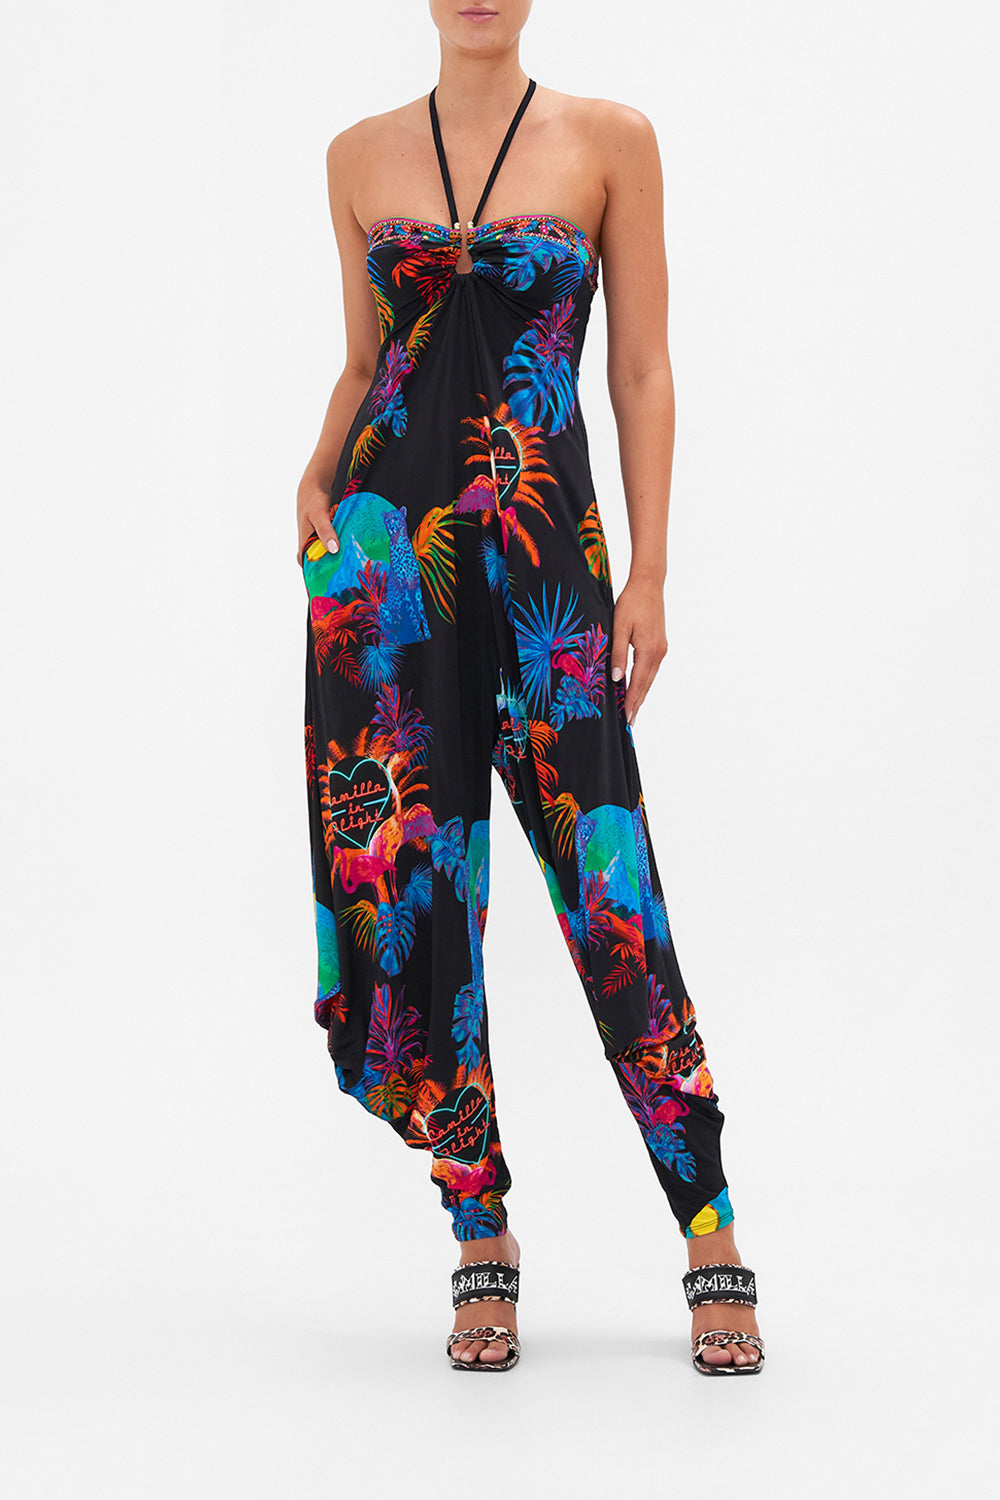 DRAPED PANT JUMPSUIT WITH HARDWARE NAUGHTY NEON